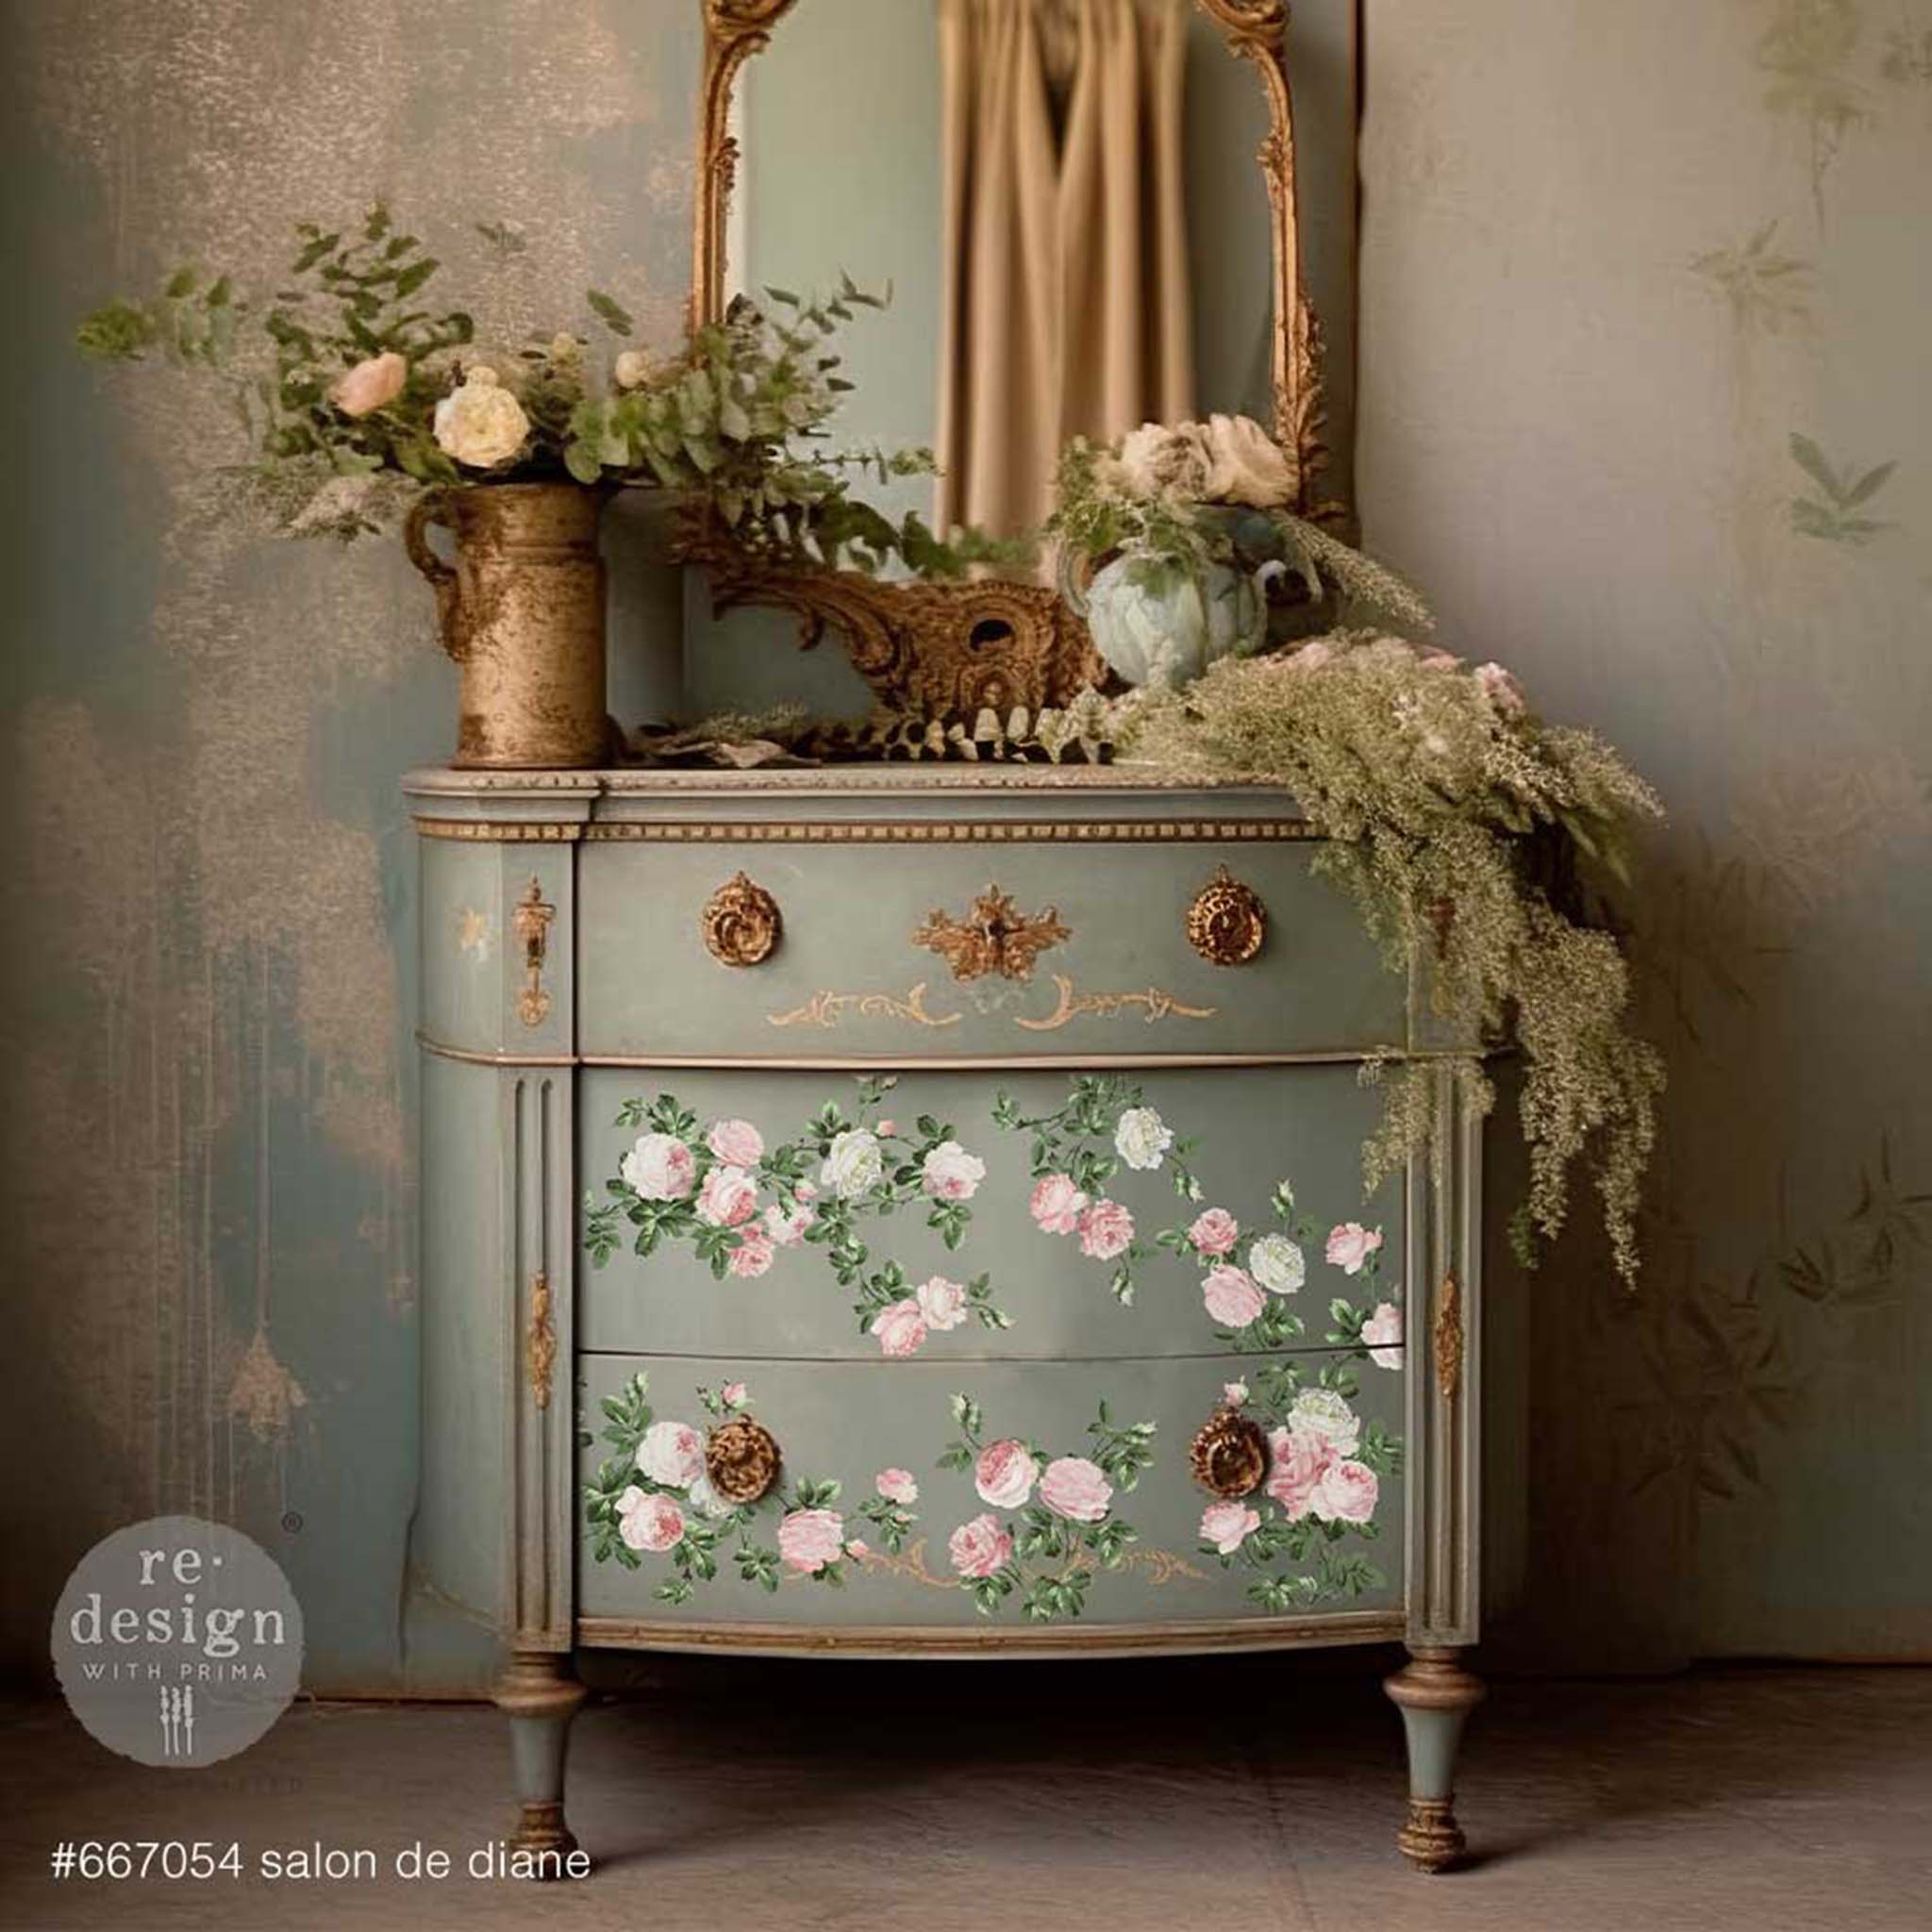 A vintage 3-drawer nightstand is painted grey with bronze accents and features ReDesign with Prima's Salon De Diane 12"x12" rub-on transfer on its 2 bottom drawers.